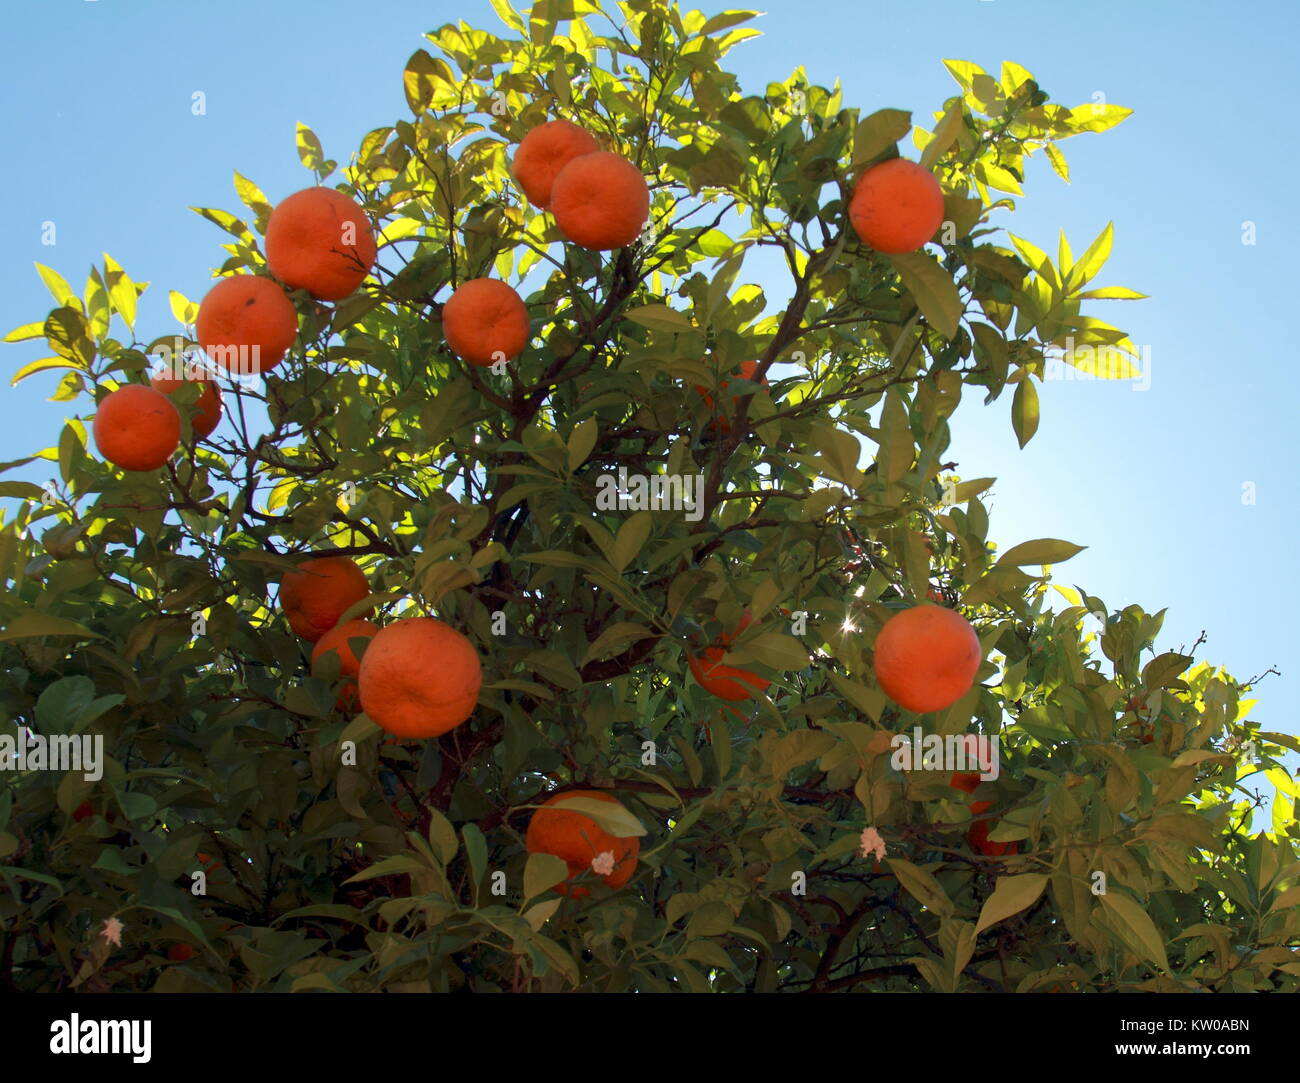 Branches of the tangerine tree with ripe fruits against blue sky Stock Photo